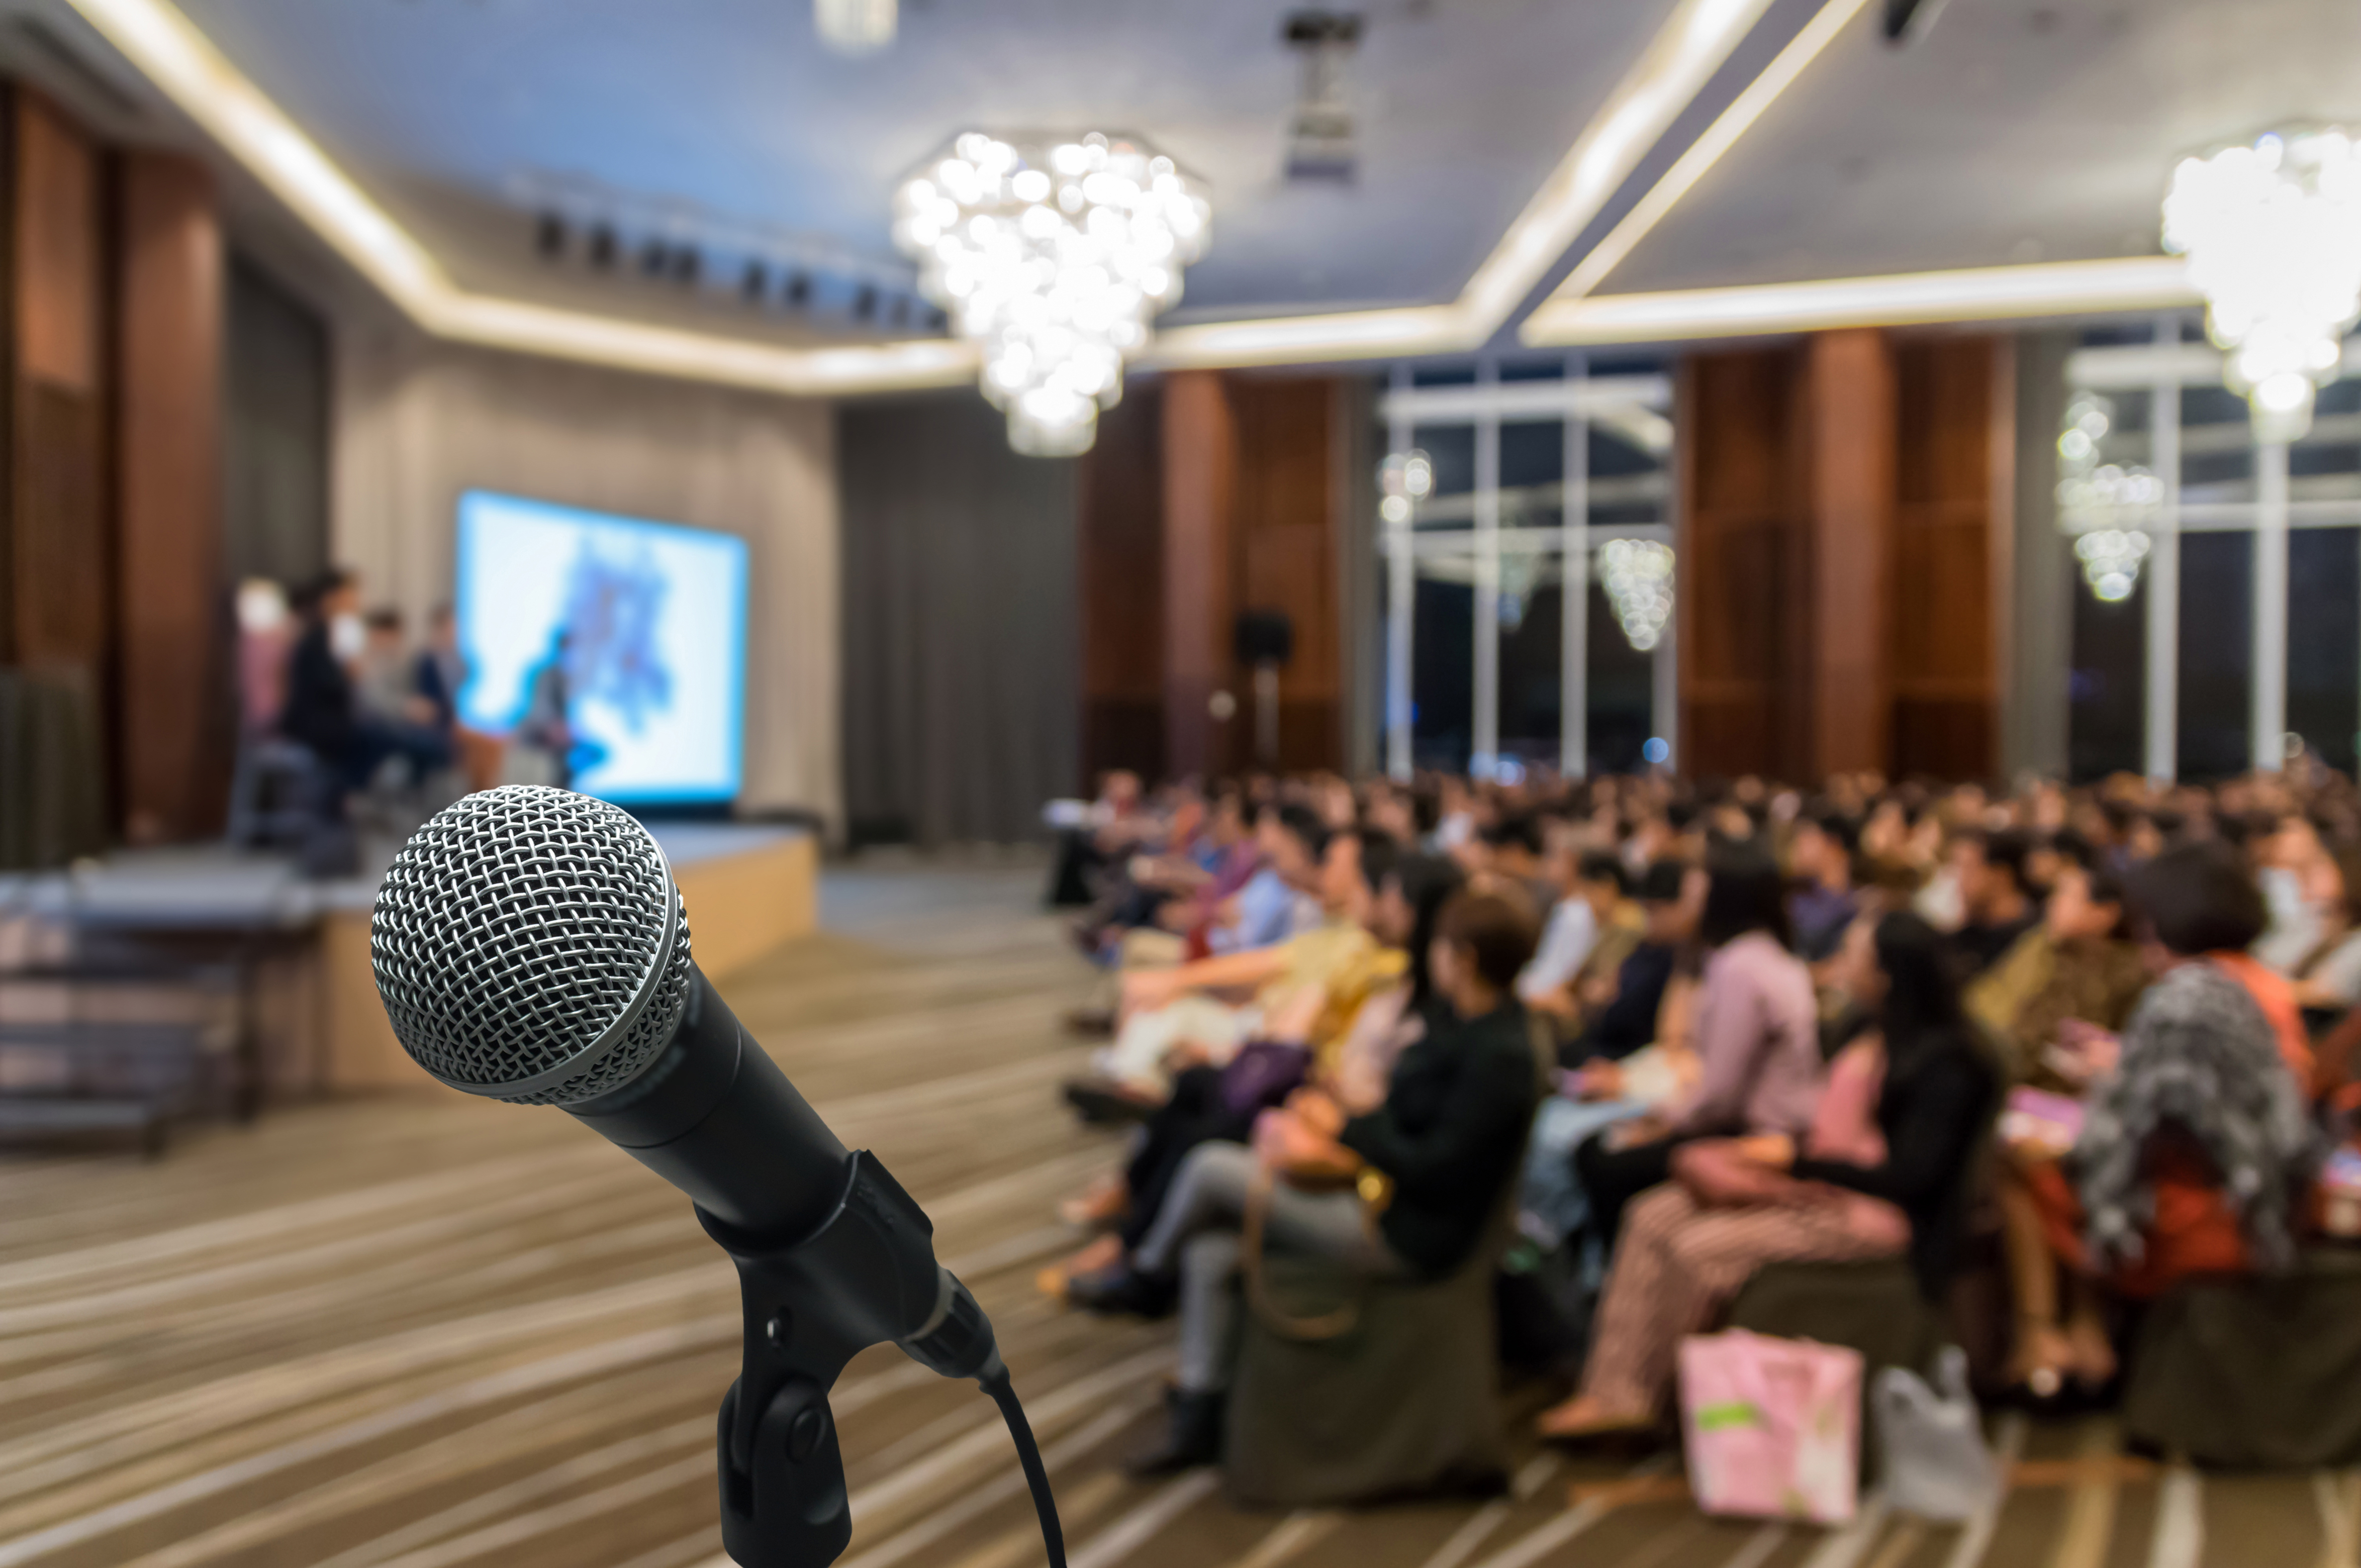 7 Top Tips for Public Speaking